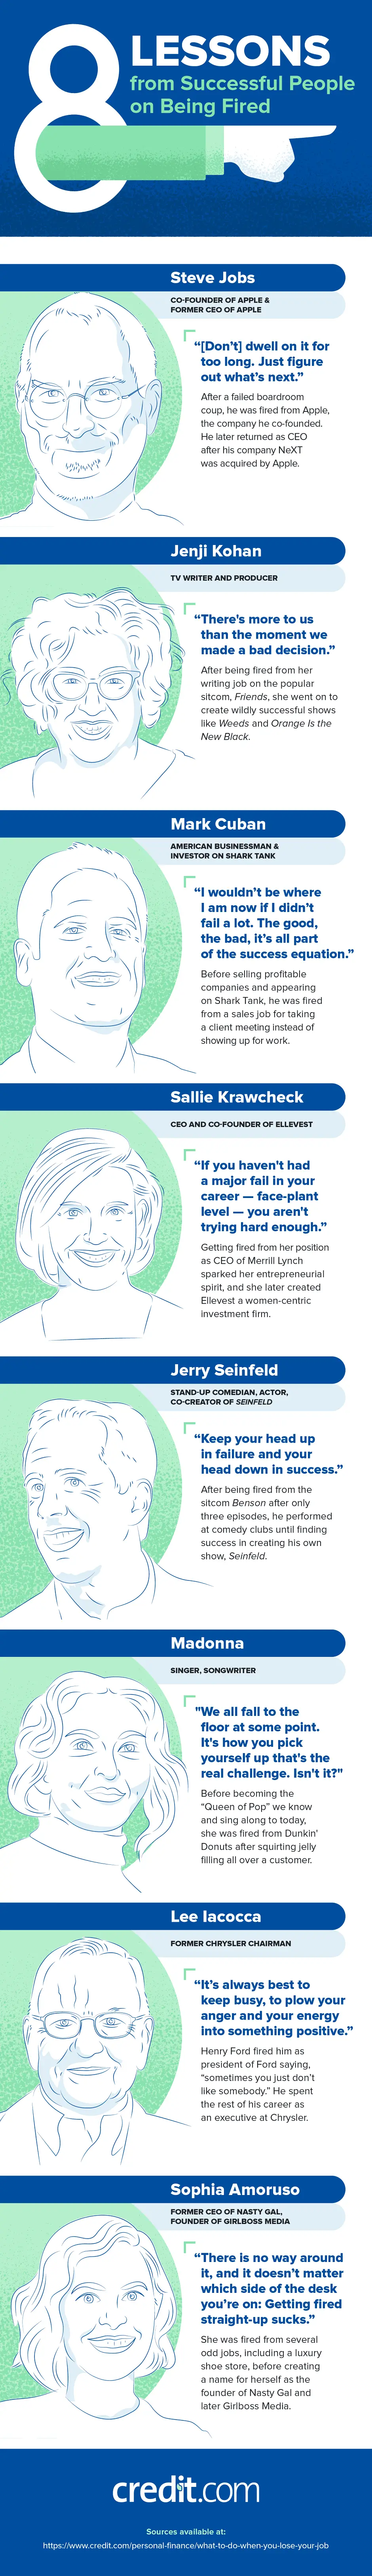 Powerful Lessons on Being Fired from Successful People – Infographic